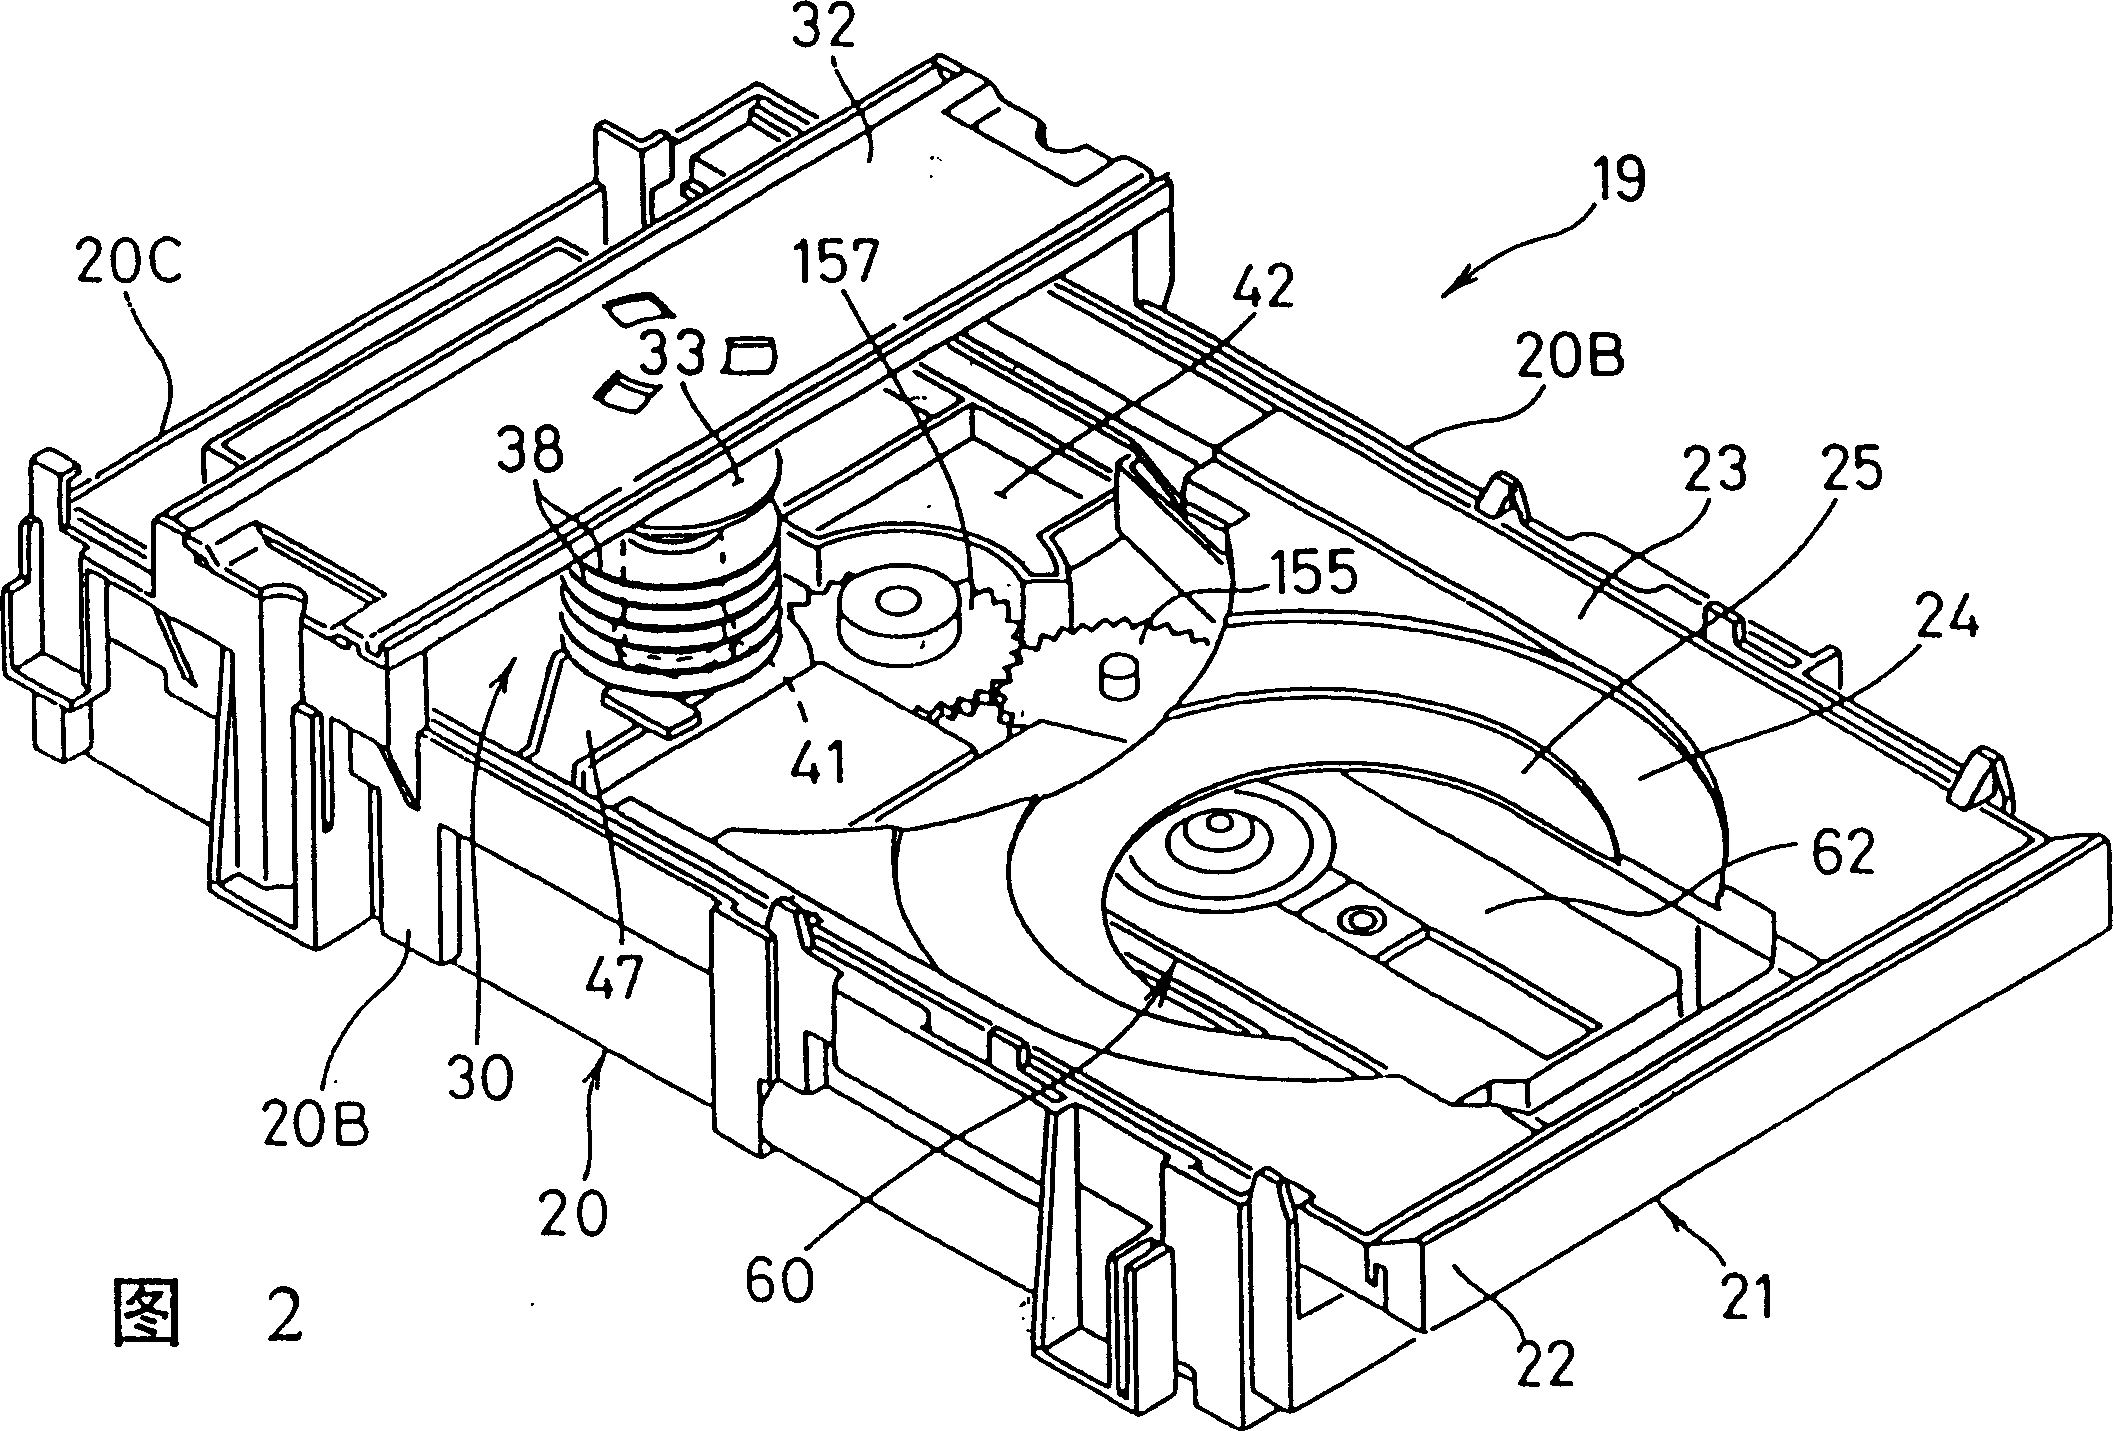 Disk replacing device